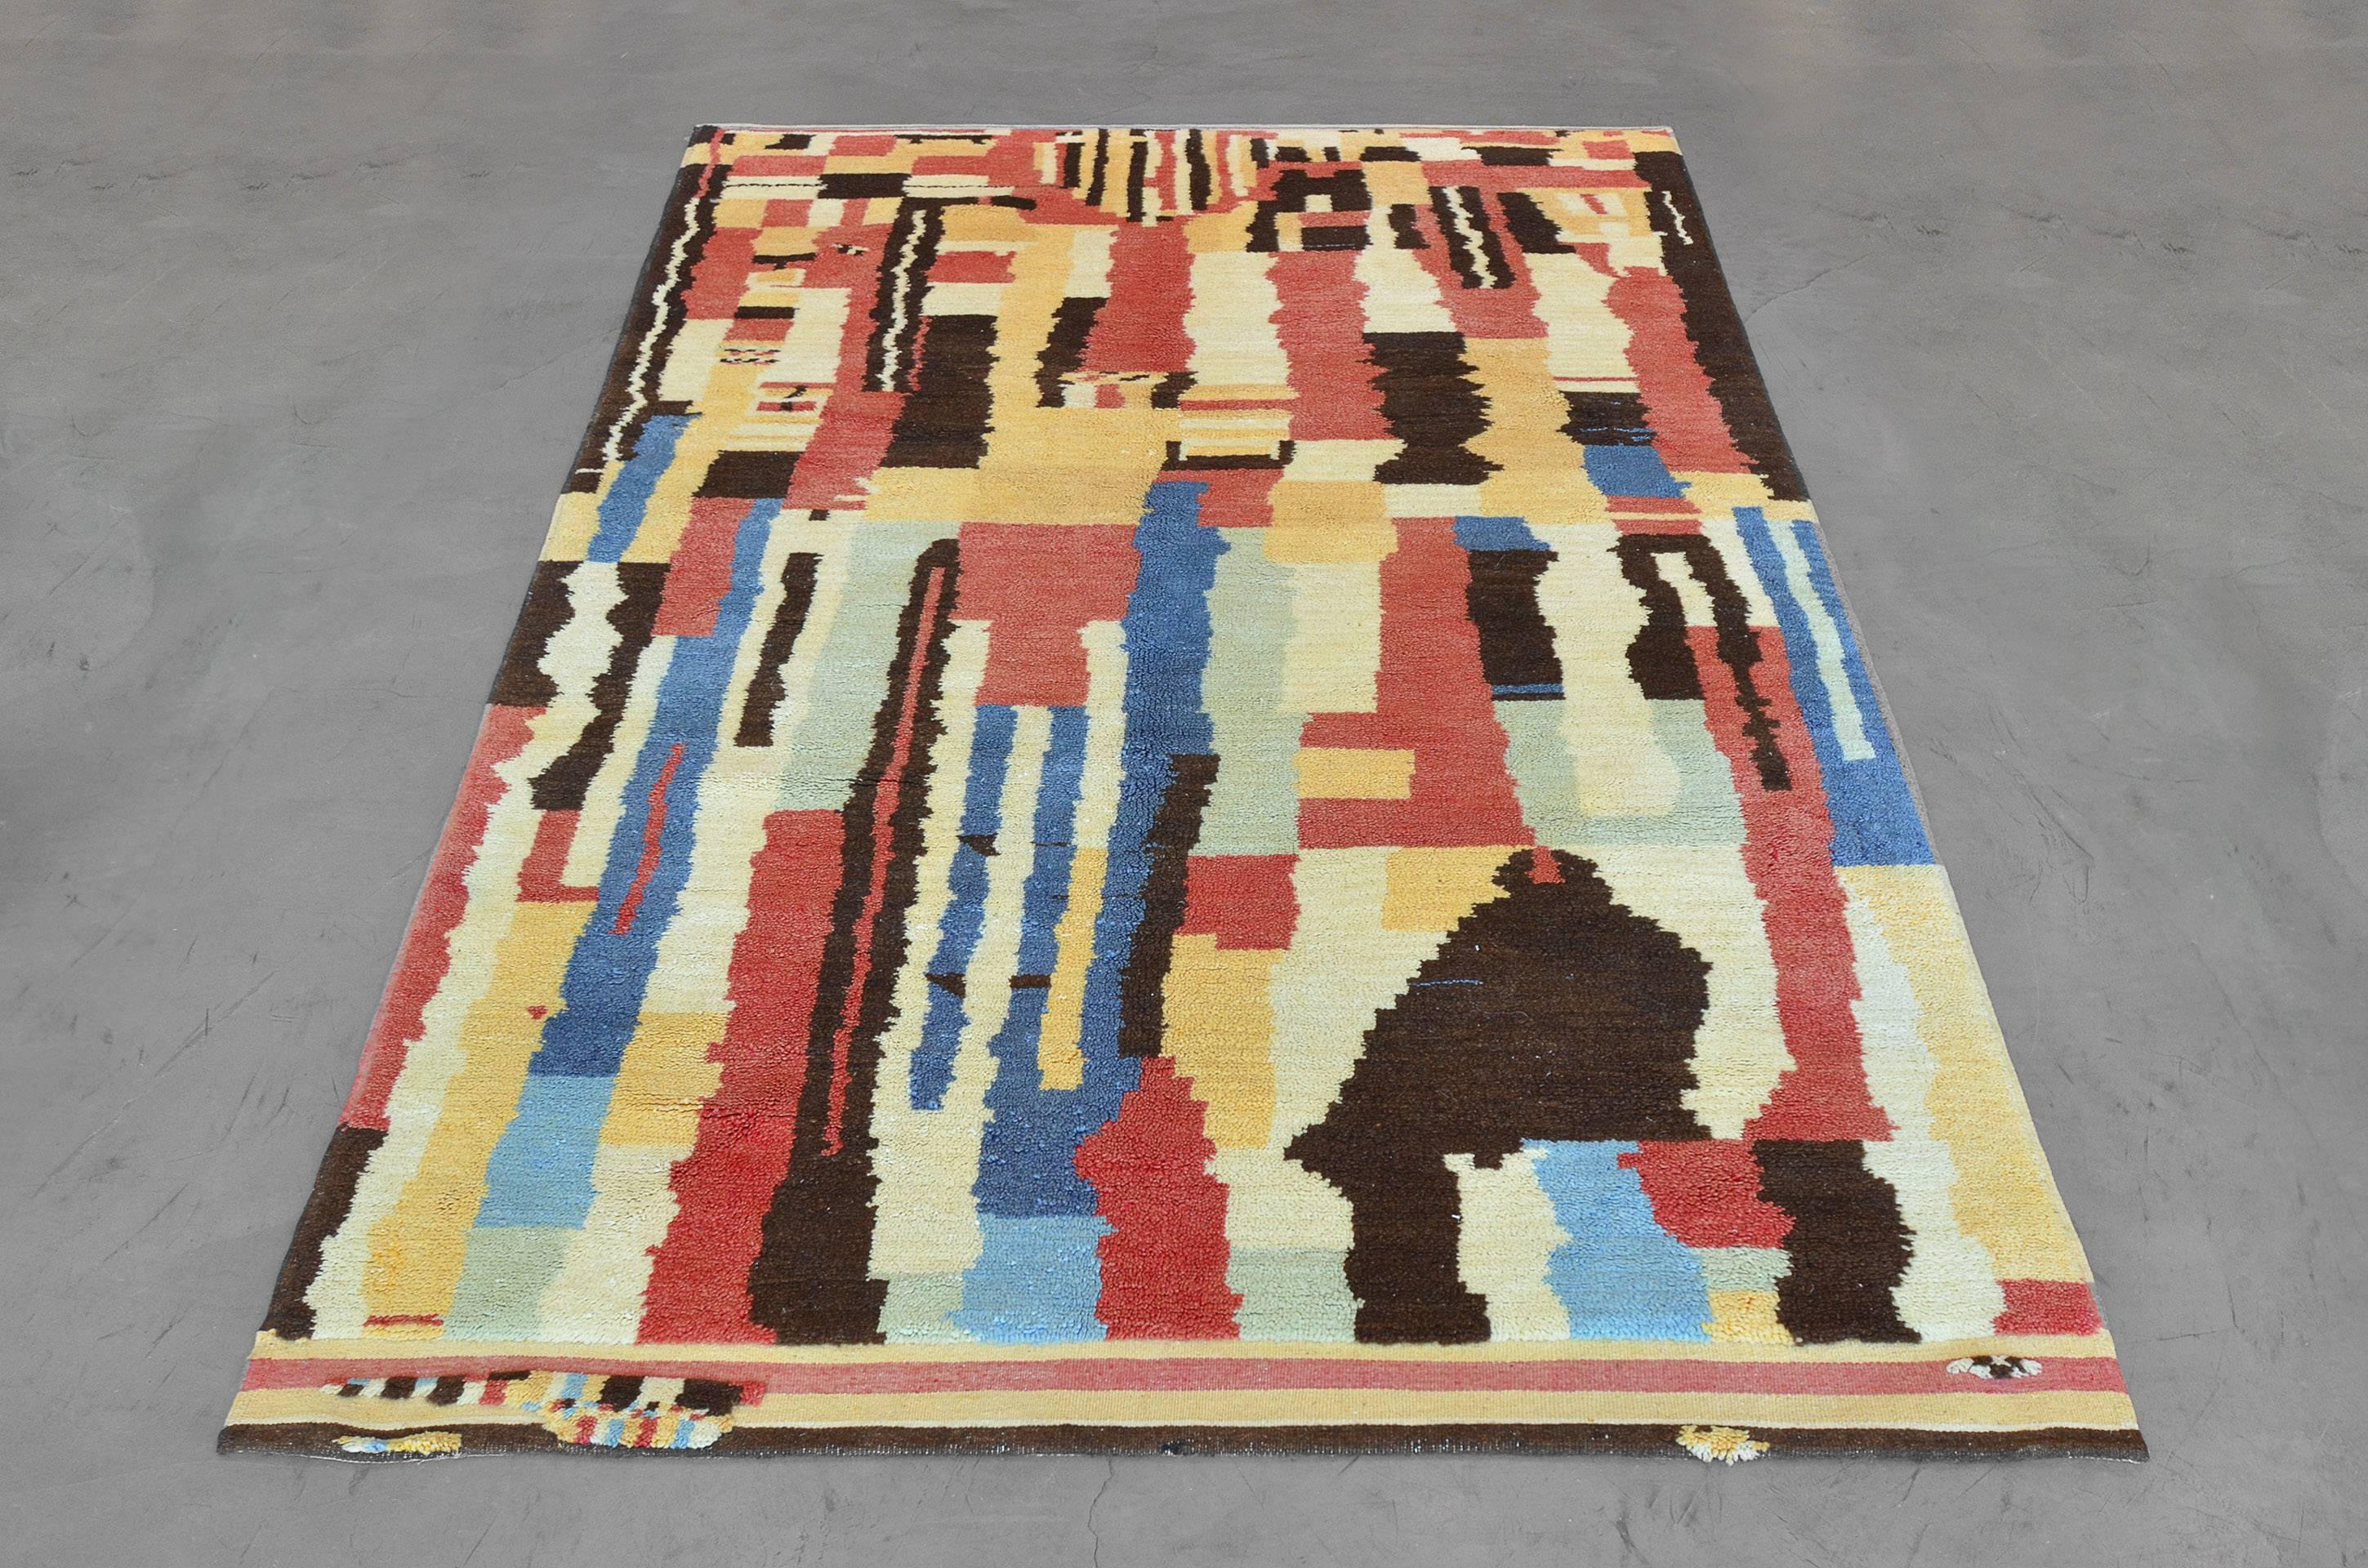 Late 20th century, hand-knotted wool rug from Morocco features an expressive collage of rectilinear color blocks and well-blended irregular segments in a vivid combination of red, citron, beige, black, and blues. Sized at 6’10” x 9’9” this vintage